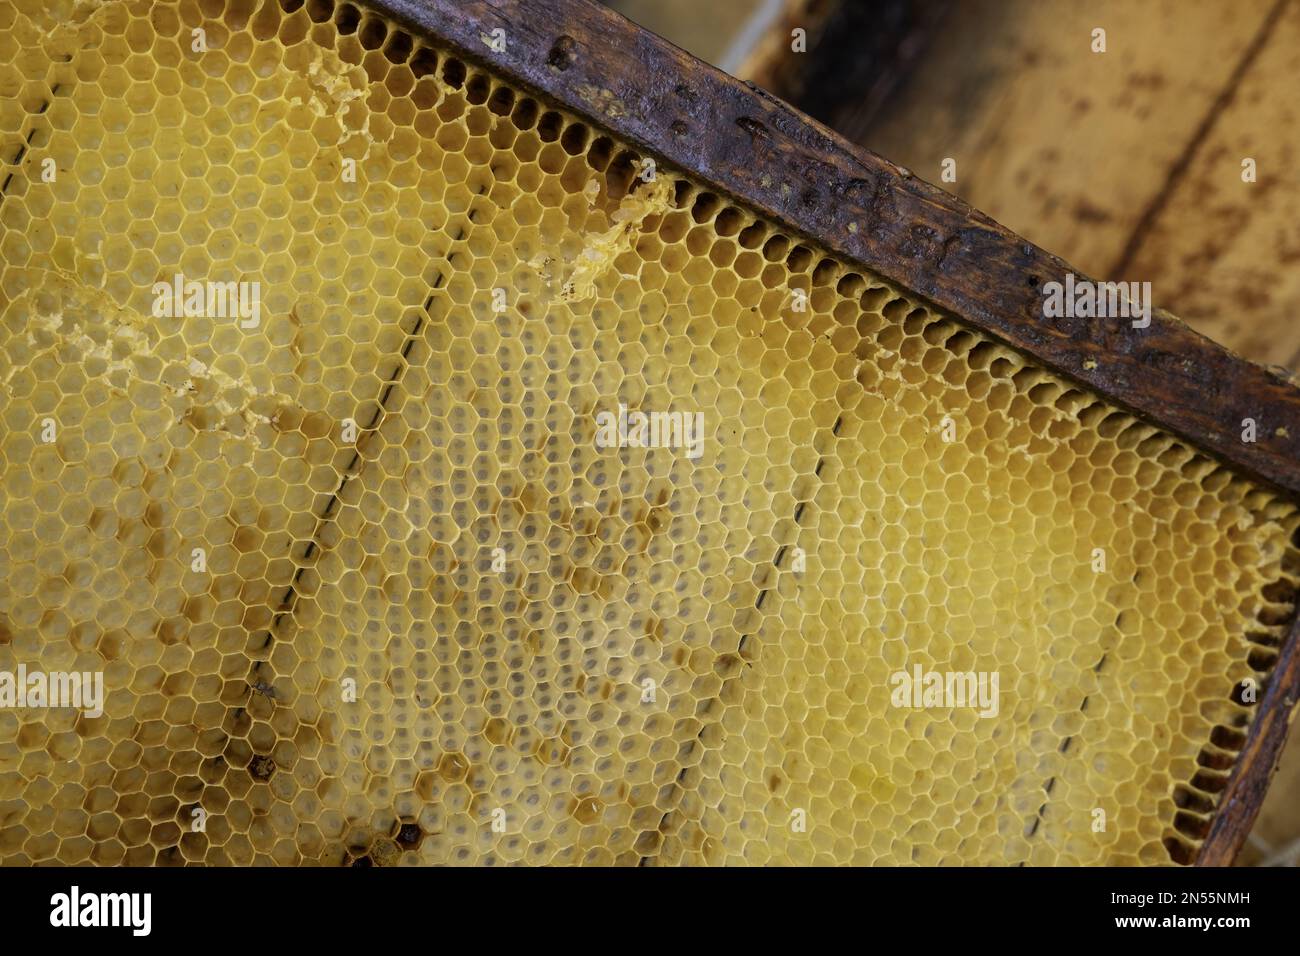 Detail of honey collection in a bee farm in nature Stock Photo